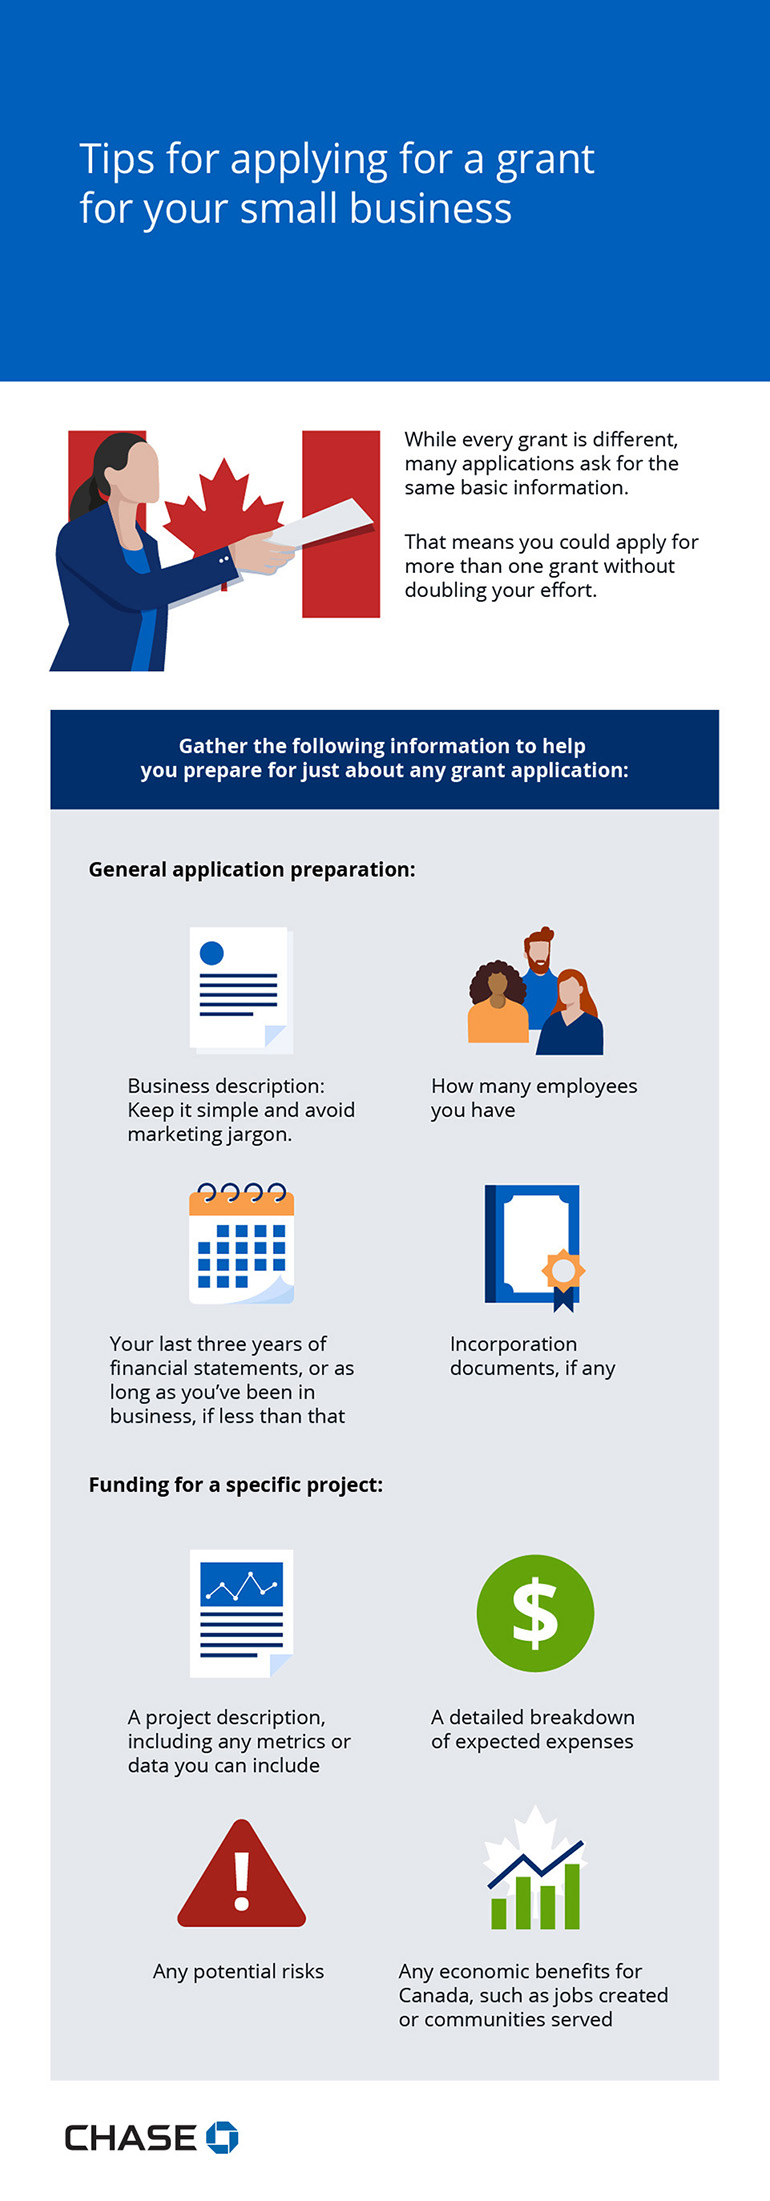 Infographic illustrating tips for applying for a grant for your small business